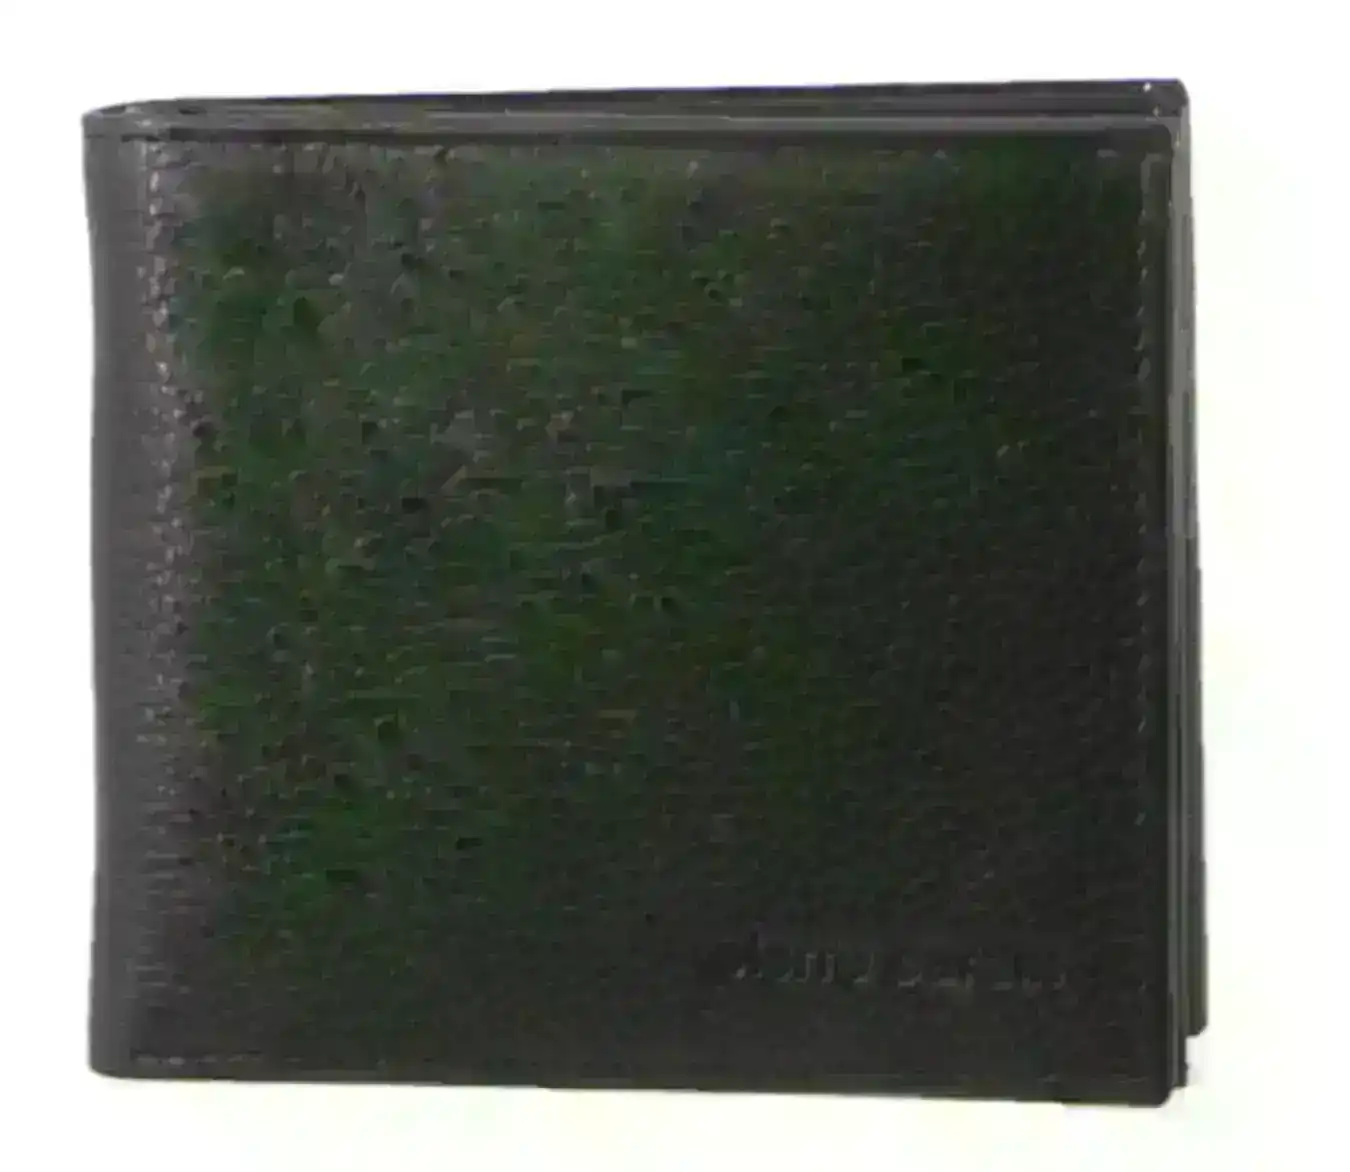 Pierre Cardin Mens Tri Fold Leather Wallet w/ RFID Protection - Black